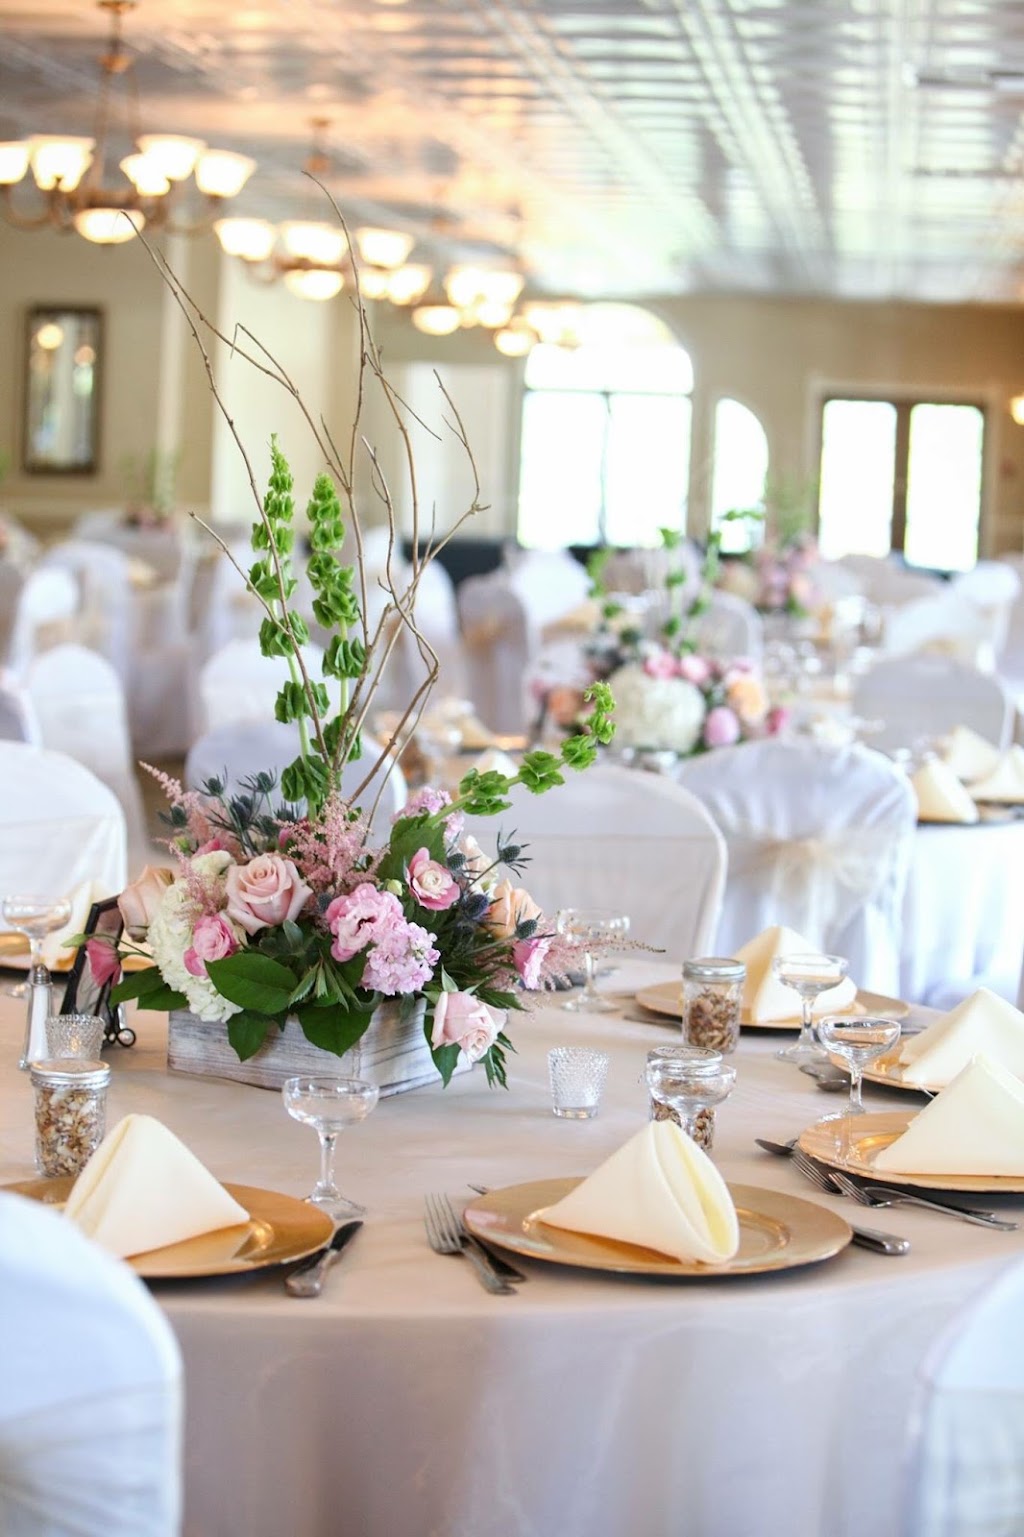 Floral Cottage Weddings & Events | 84 Stefanyk Rd, Glen Spey, NY 12737 | Phone: (845) 469-4020